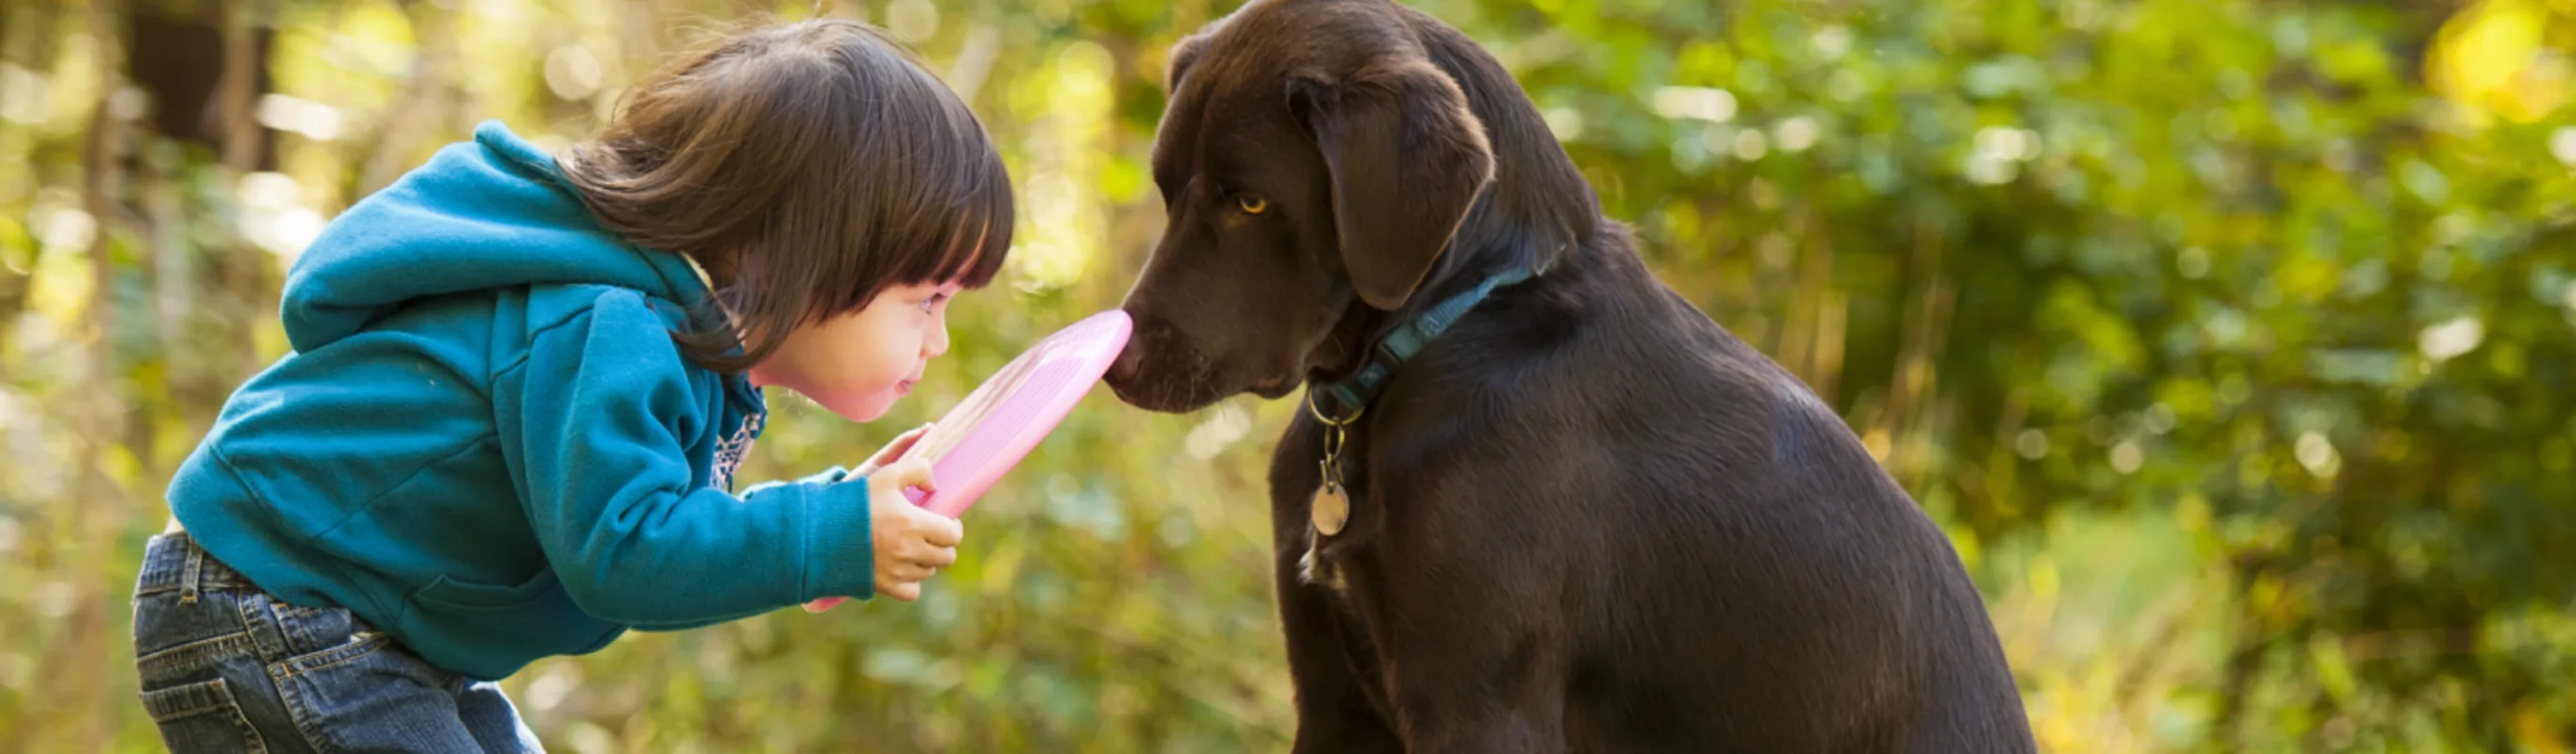 Dog sniffing a frisbee that a child has in it hands